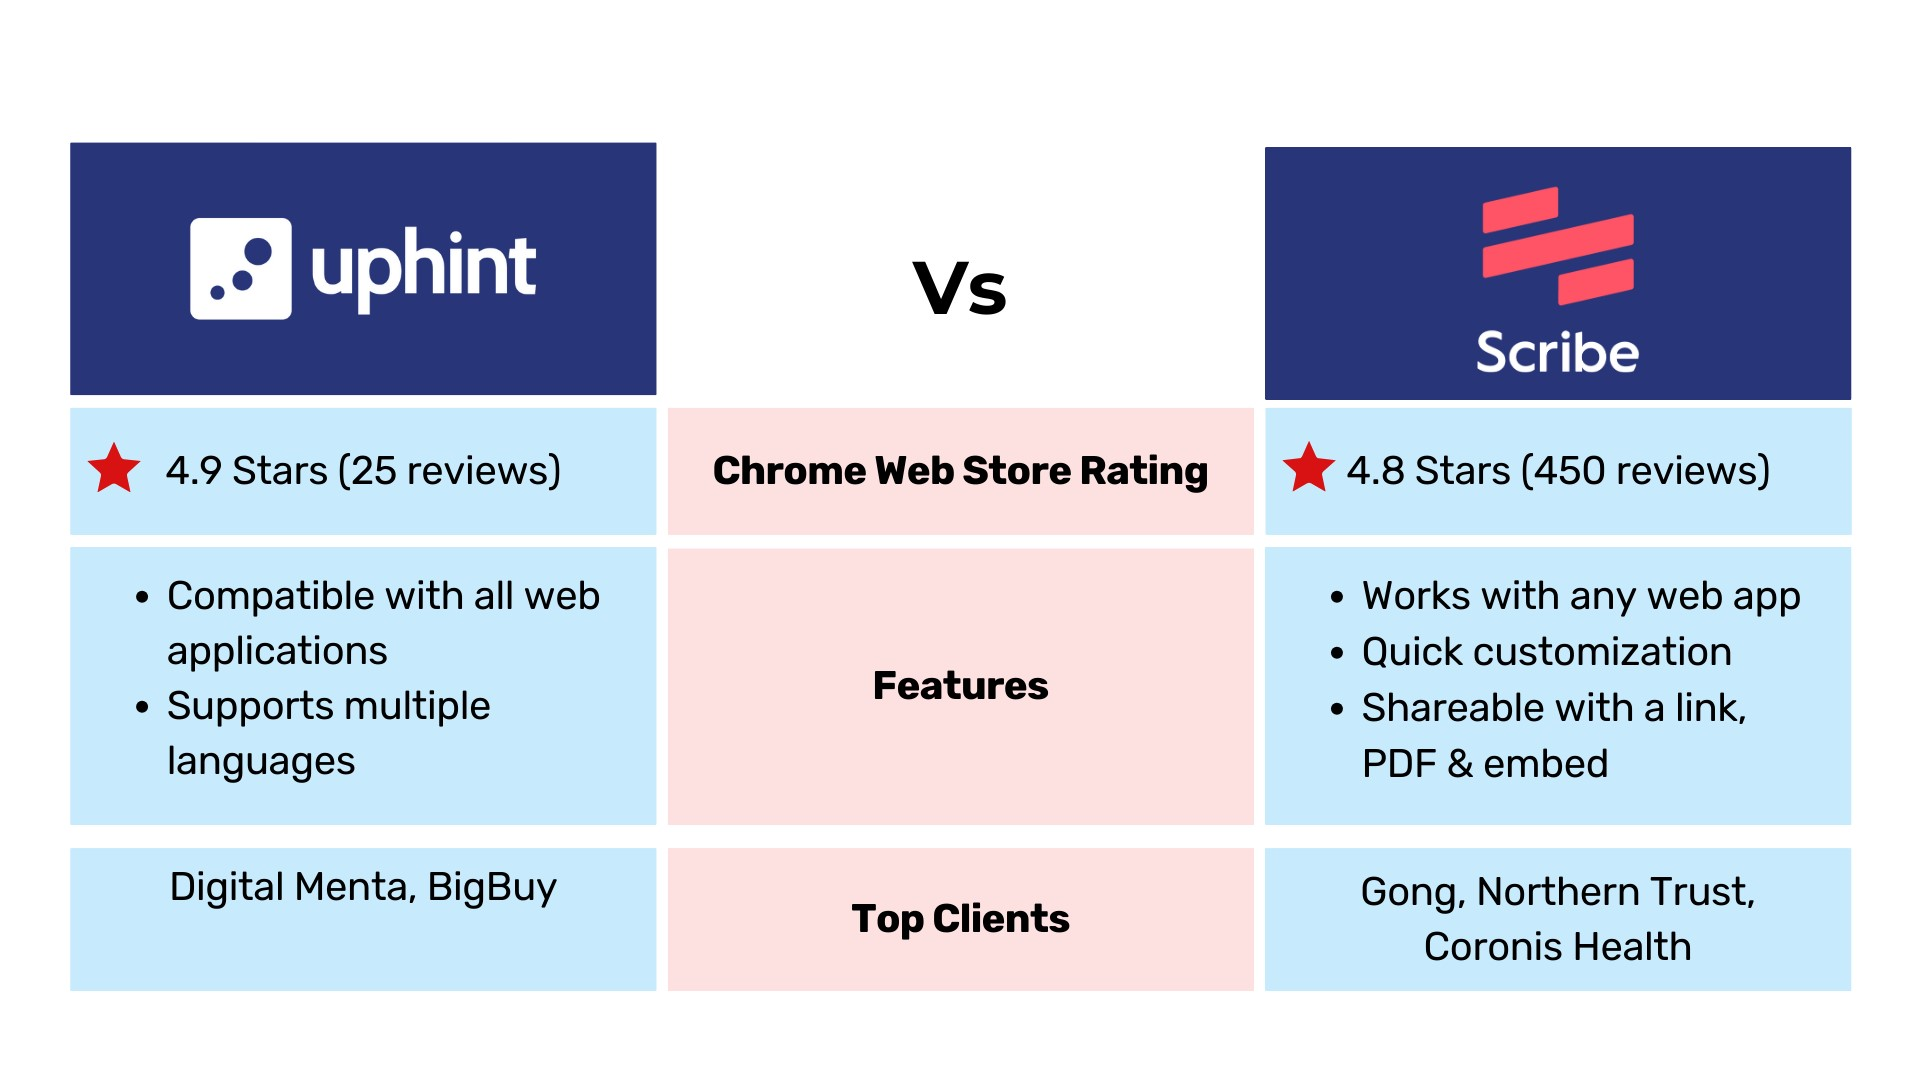 Uphint Vs Scribe comparison table with rating, features, top clients